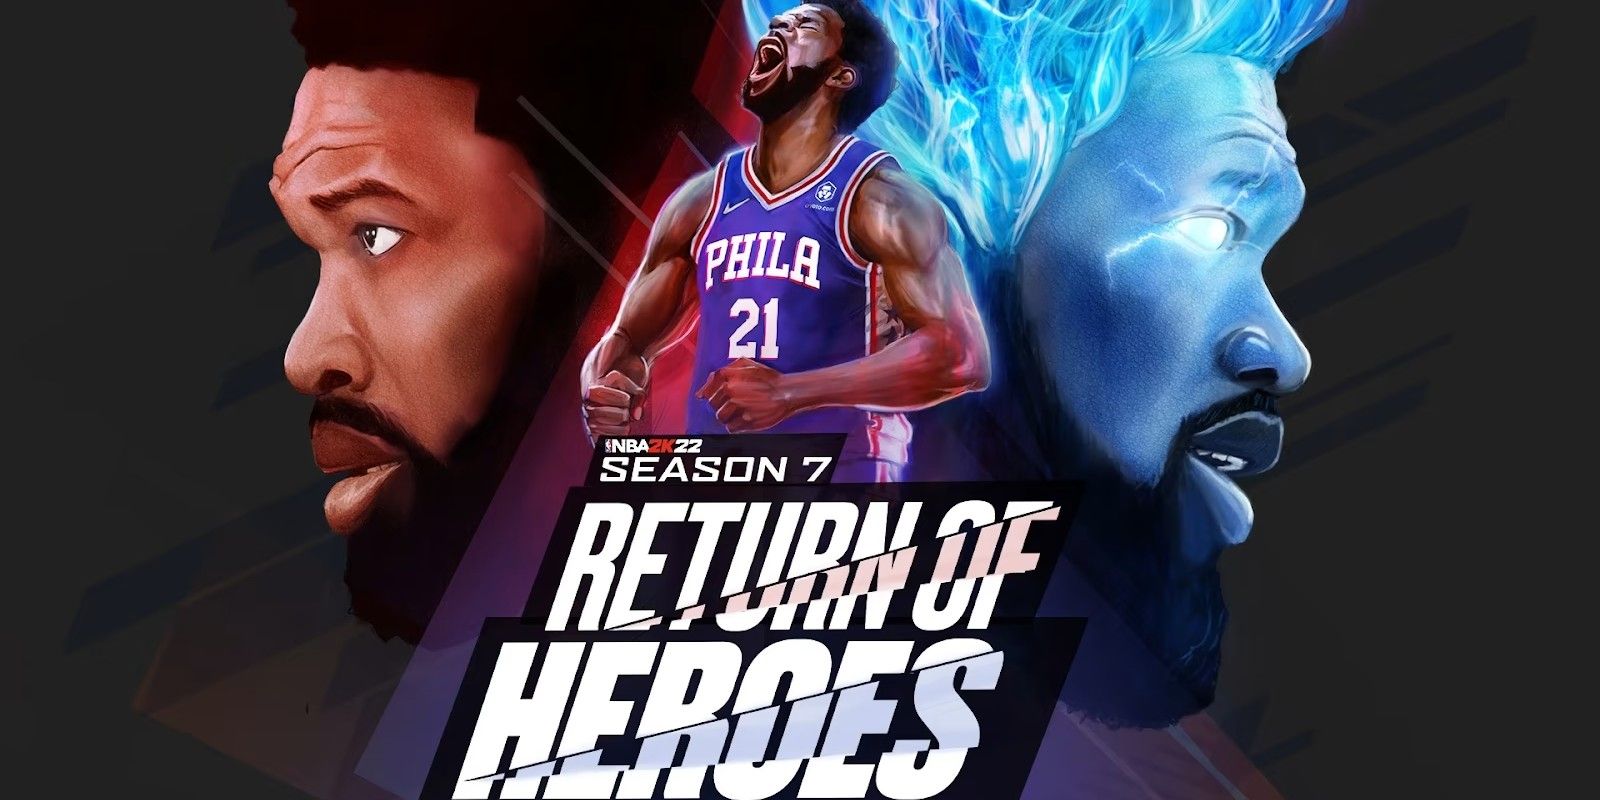 Joel Embiid in various poses with a graphic under saying NBA 2K22 Season 7 Return of Heroes.